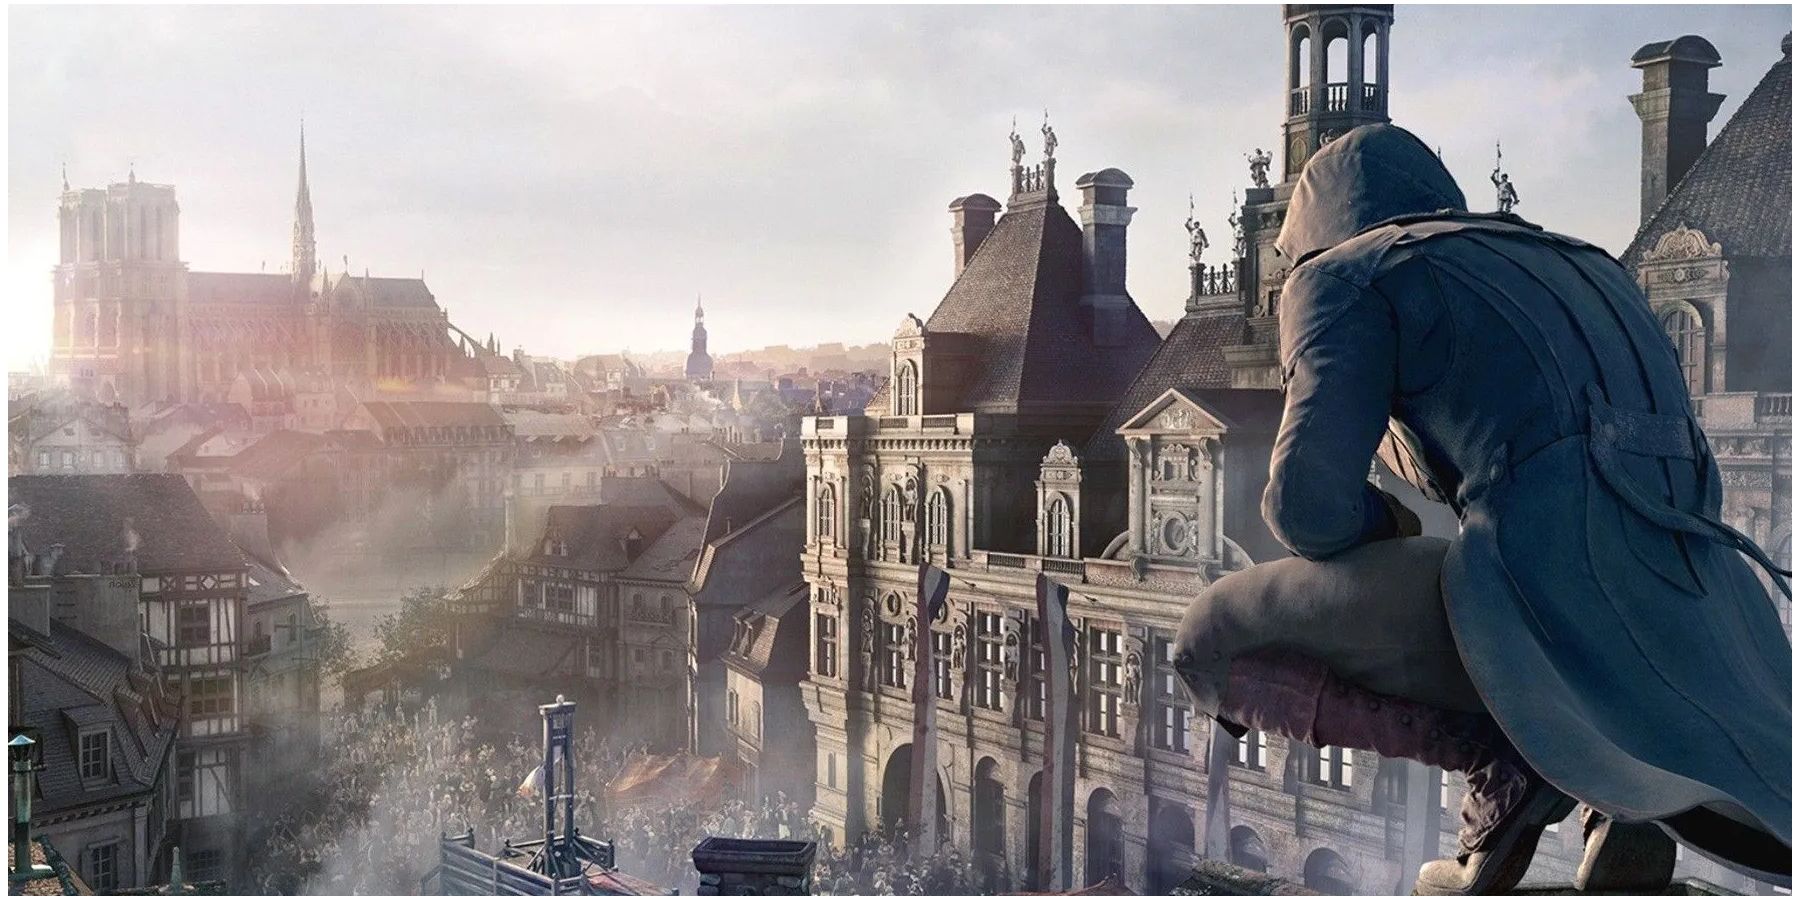 Arno watching over the city of Paris